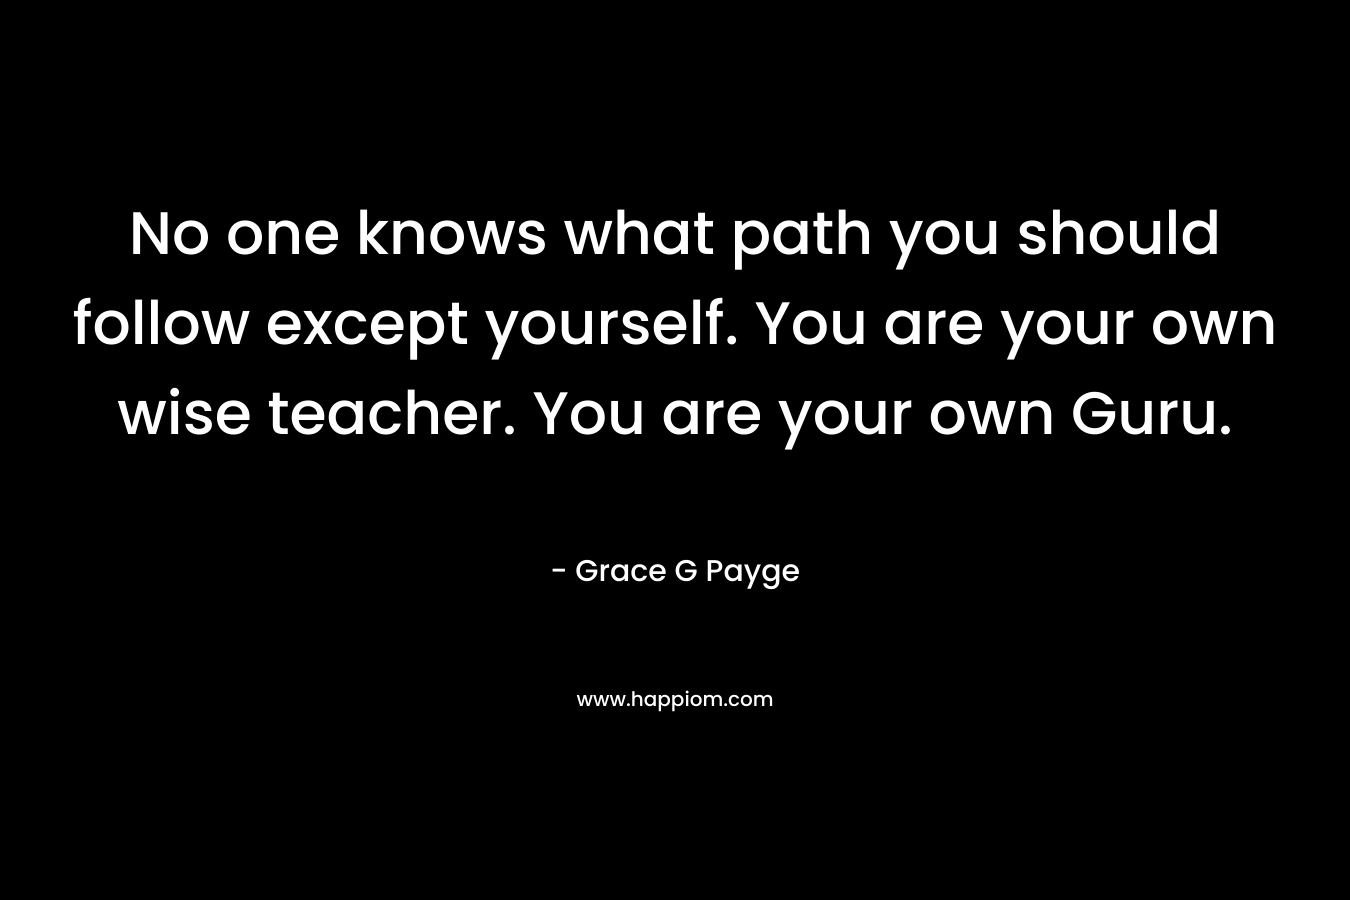 No one knows what path you should follow except yourself. You are your own wise teacher. You are your own Guru.